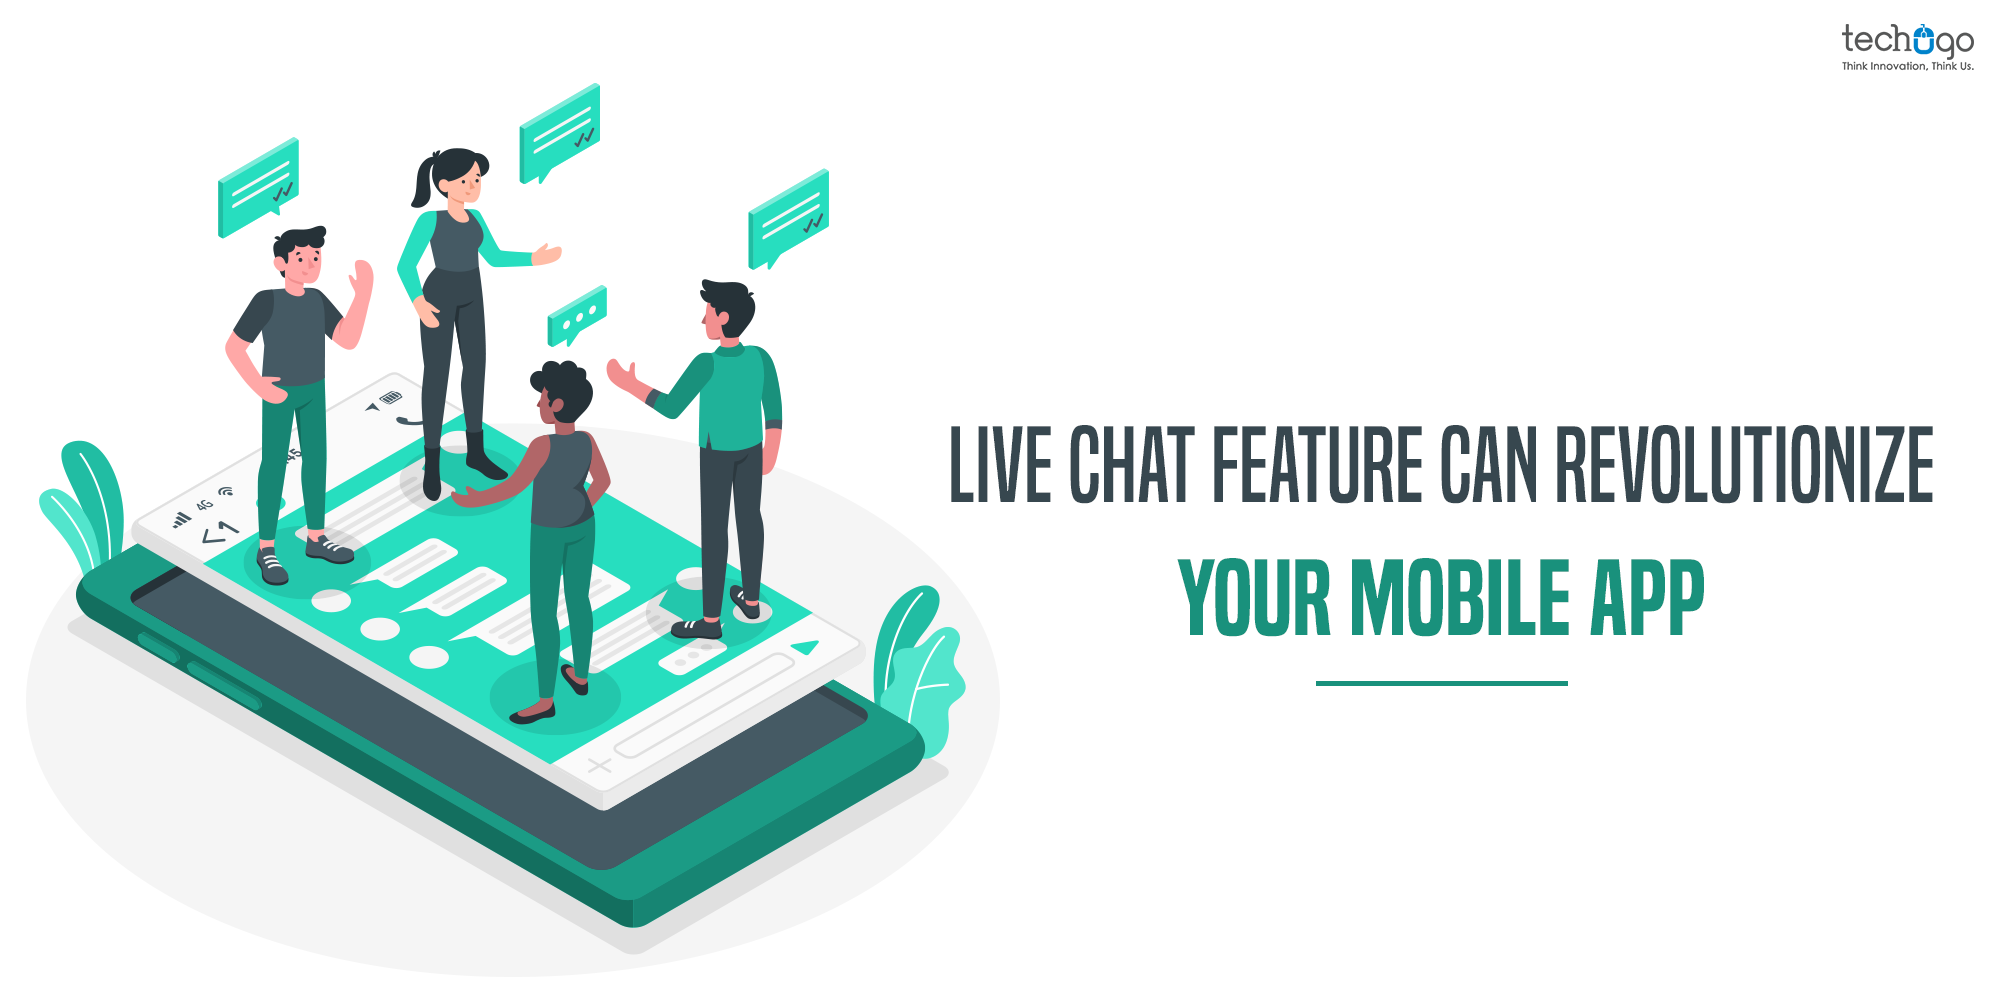 Live-chat feature opens a doorway of sales opportunities